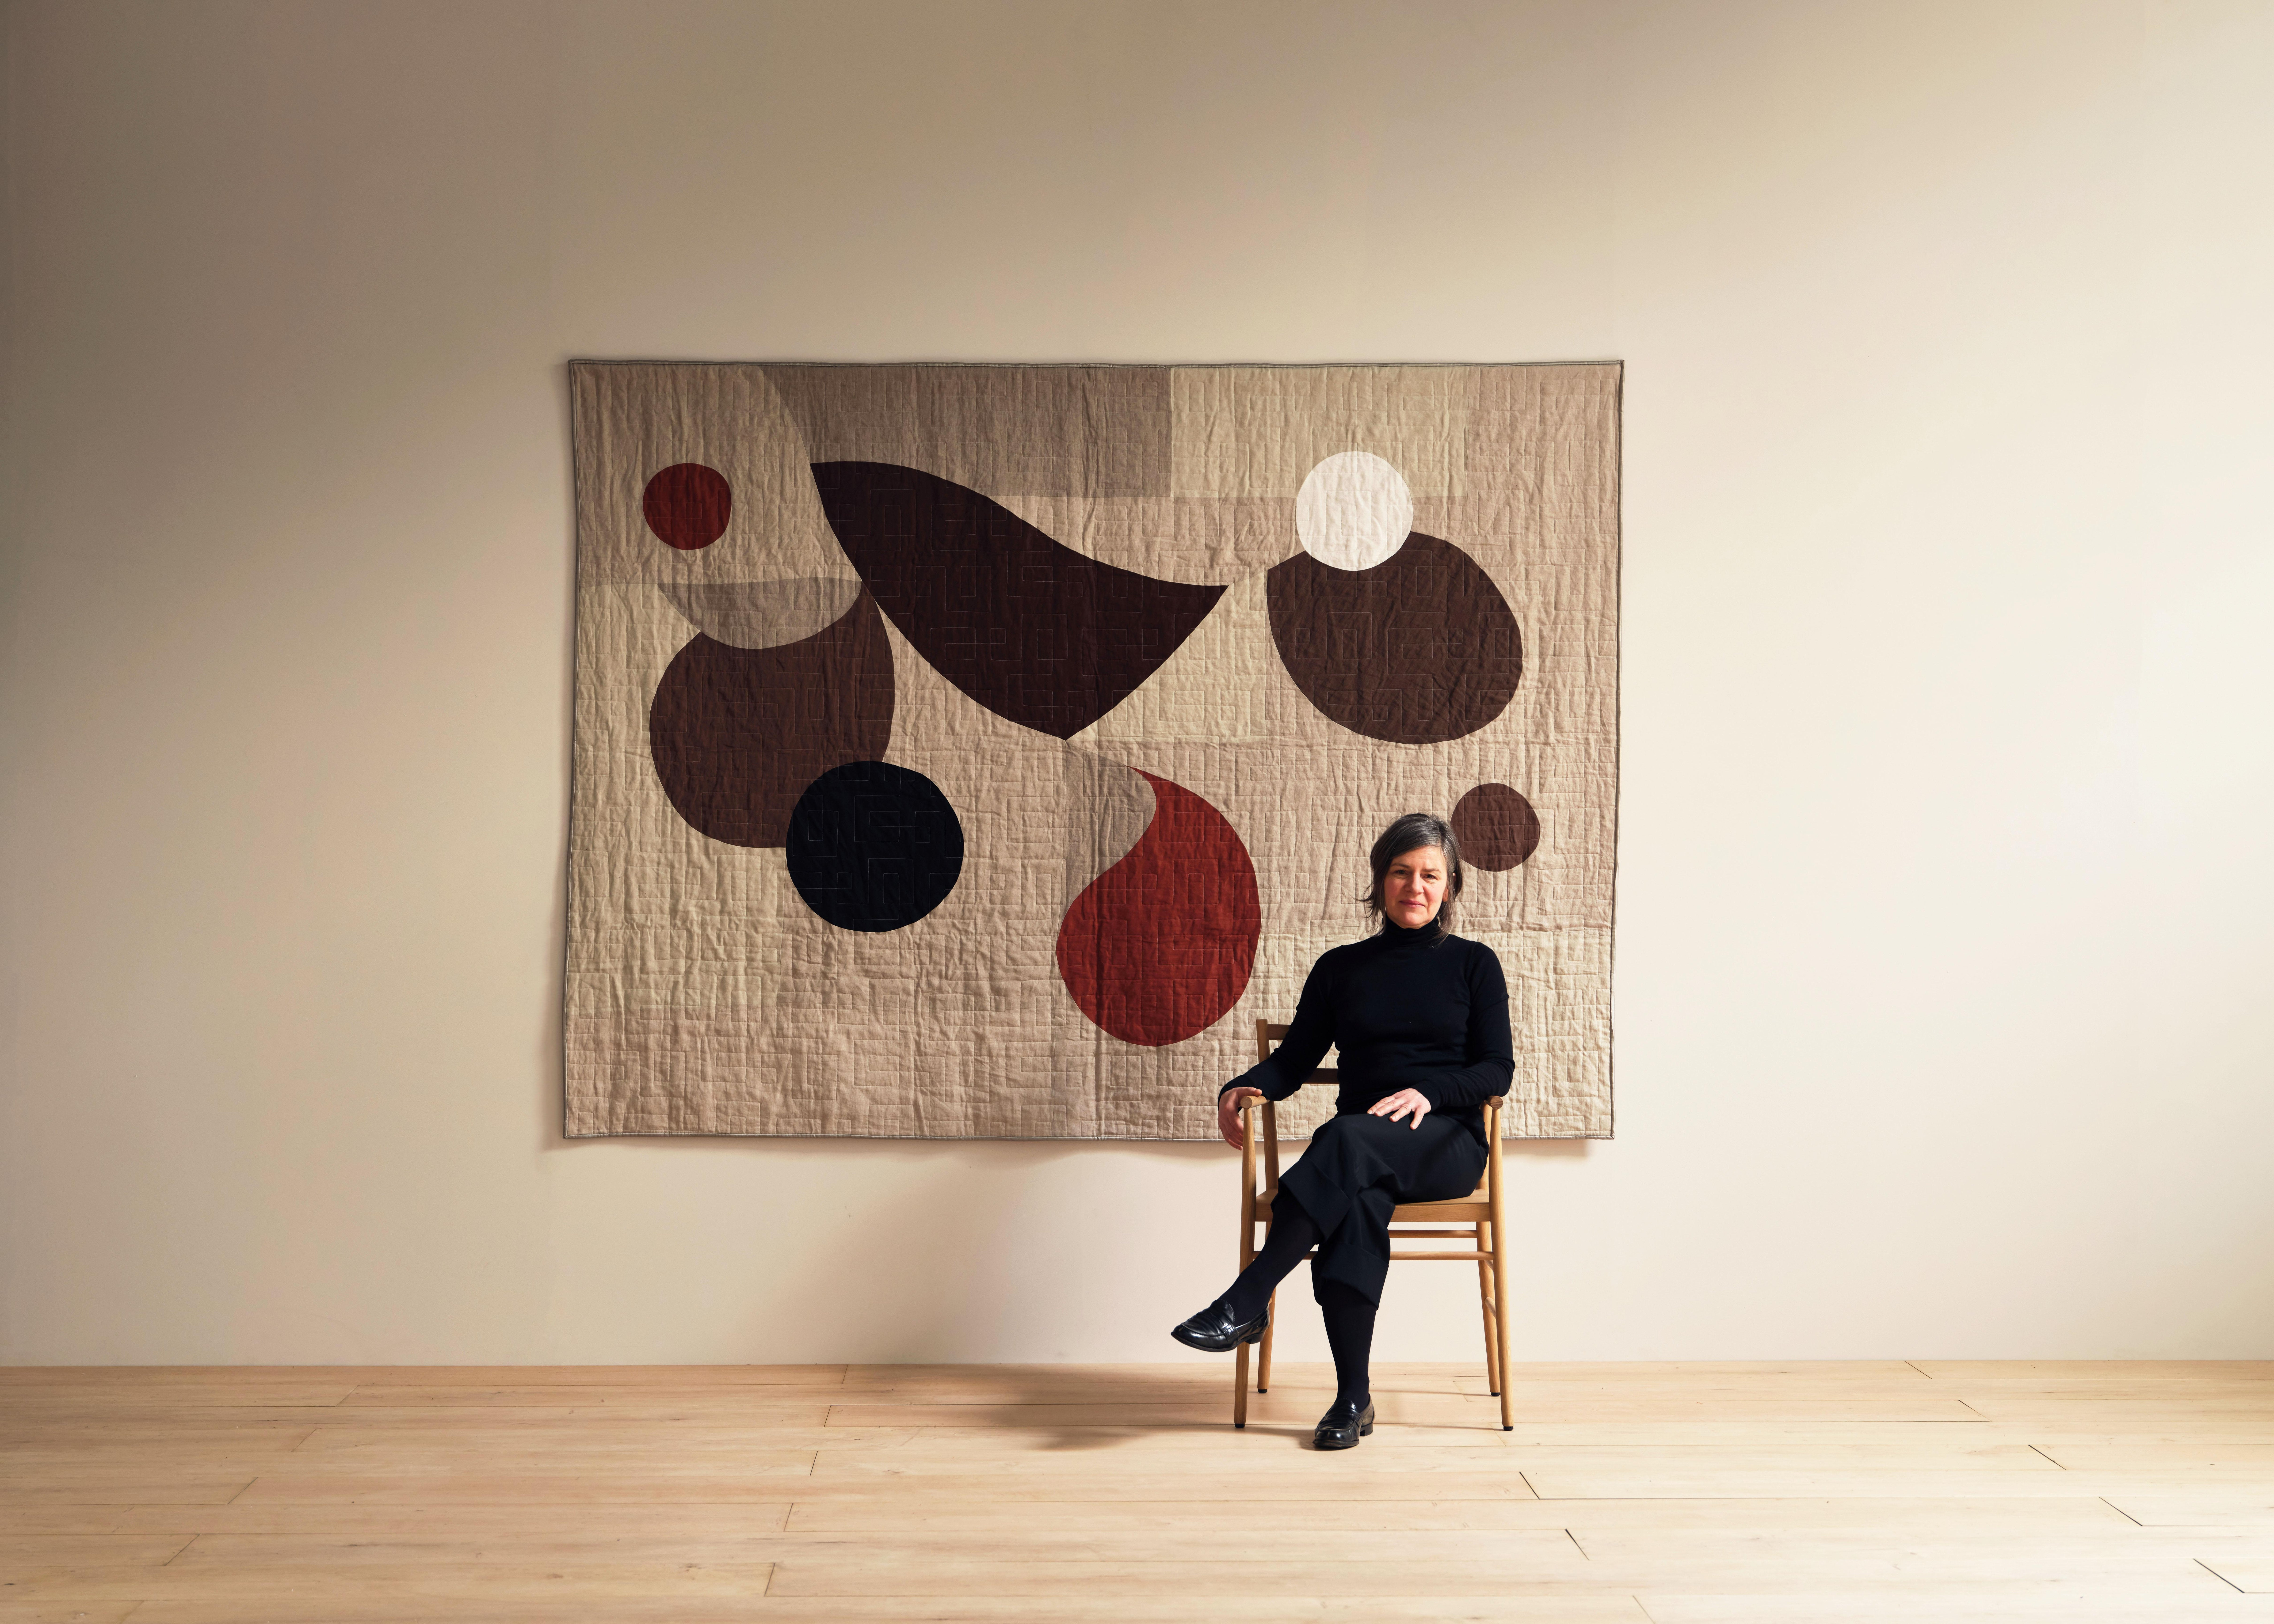 'Victor' quilt by British artist-maker, Emily Campbell. Emily’s knowledge of sewing combines with the formal and visual principles she learned as a two-dimensional designer to re-imagine the patchwork quilt. She has interpreted traditional patchwork